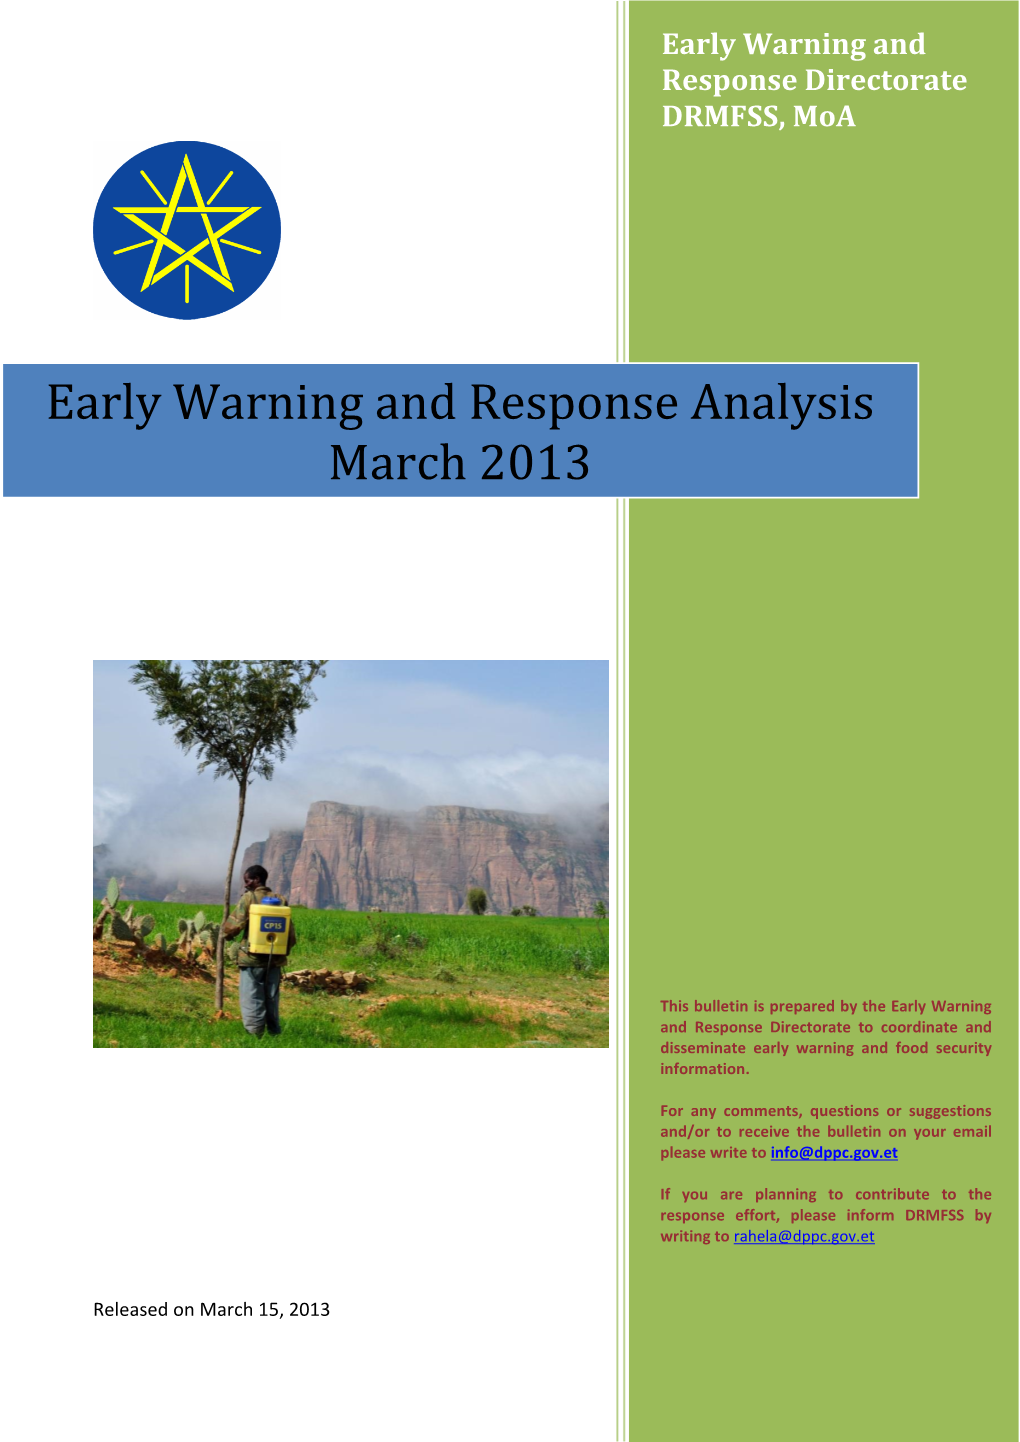 Early Warning and Response Analysis March 2013